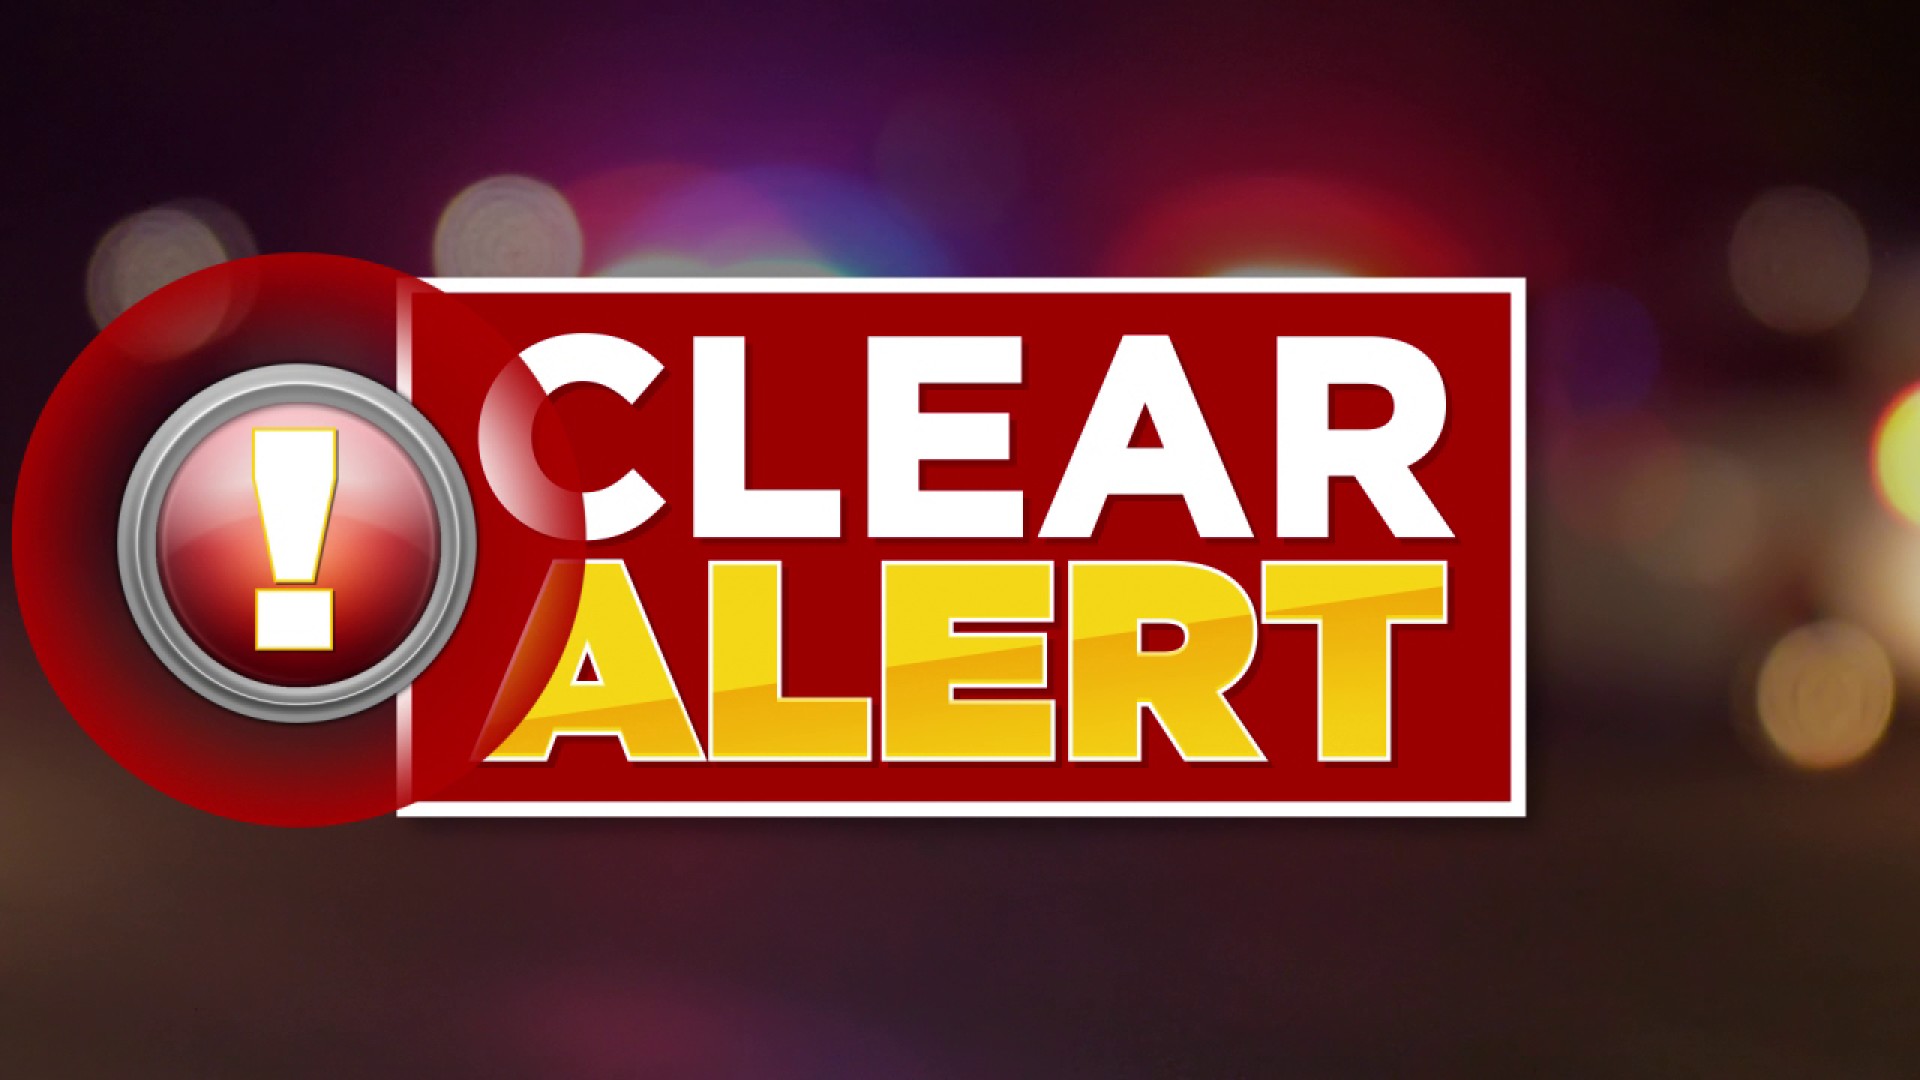 What is a clear alert in Garland TX?